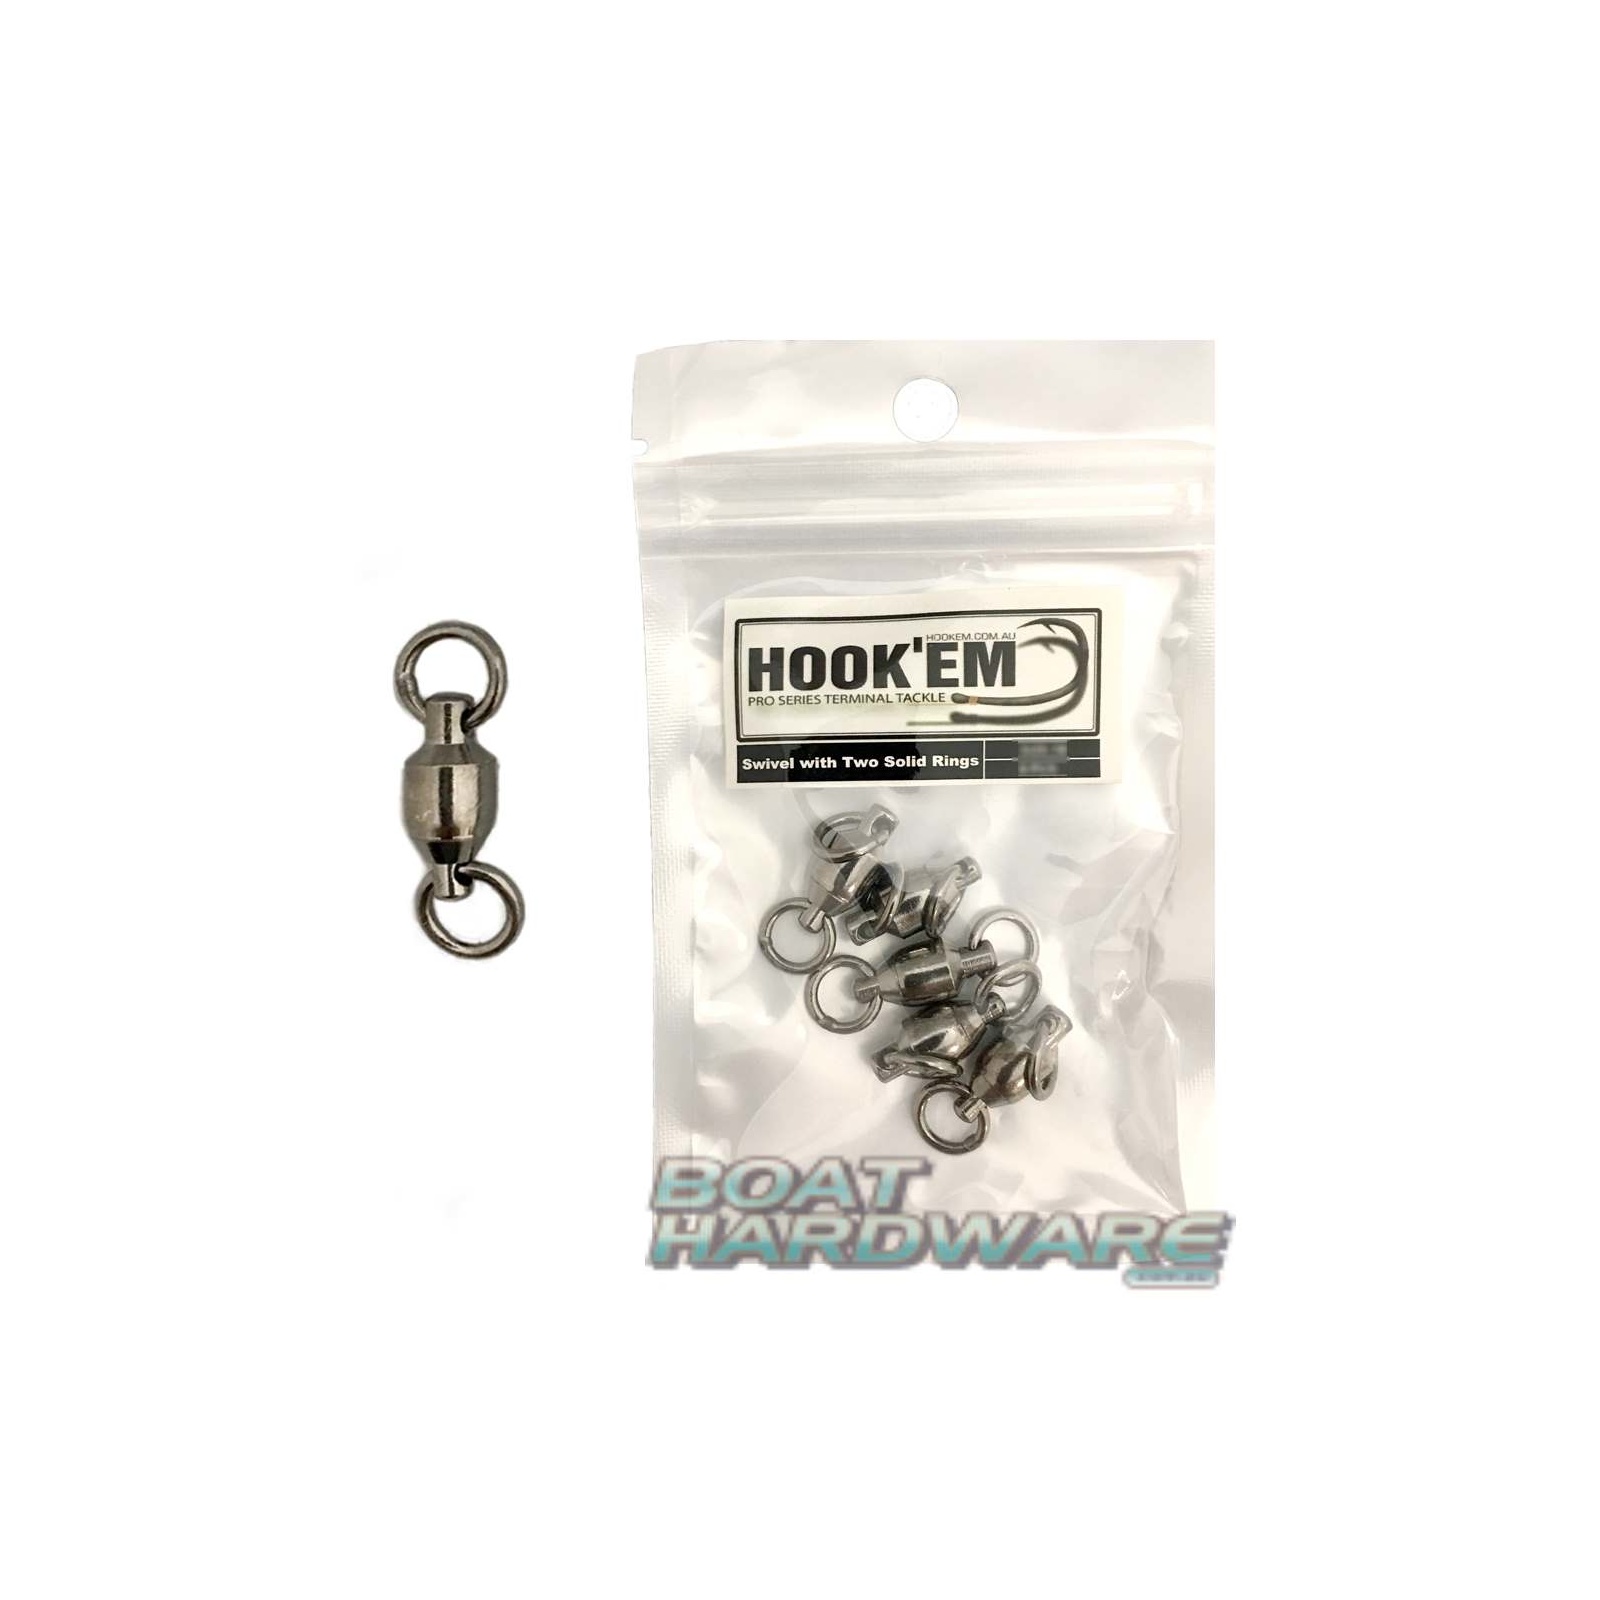 Size 4 Ball Bearing Swivel - 2 Solid Rings (Pack of 10)